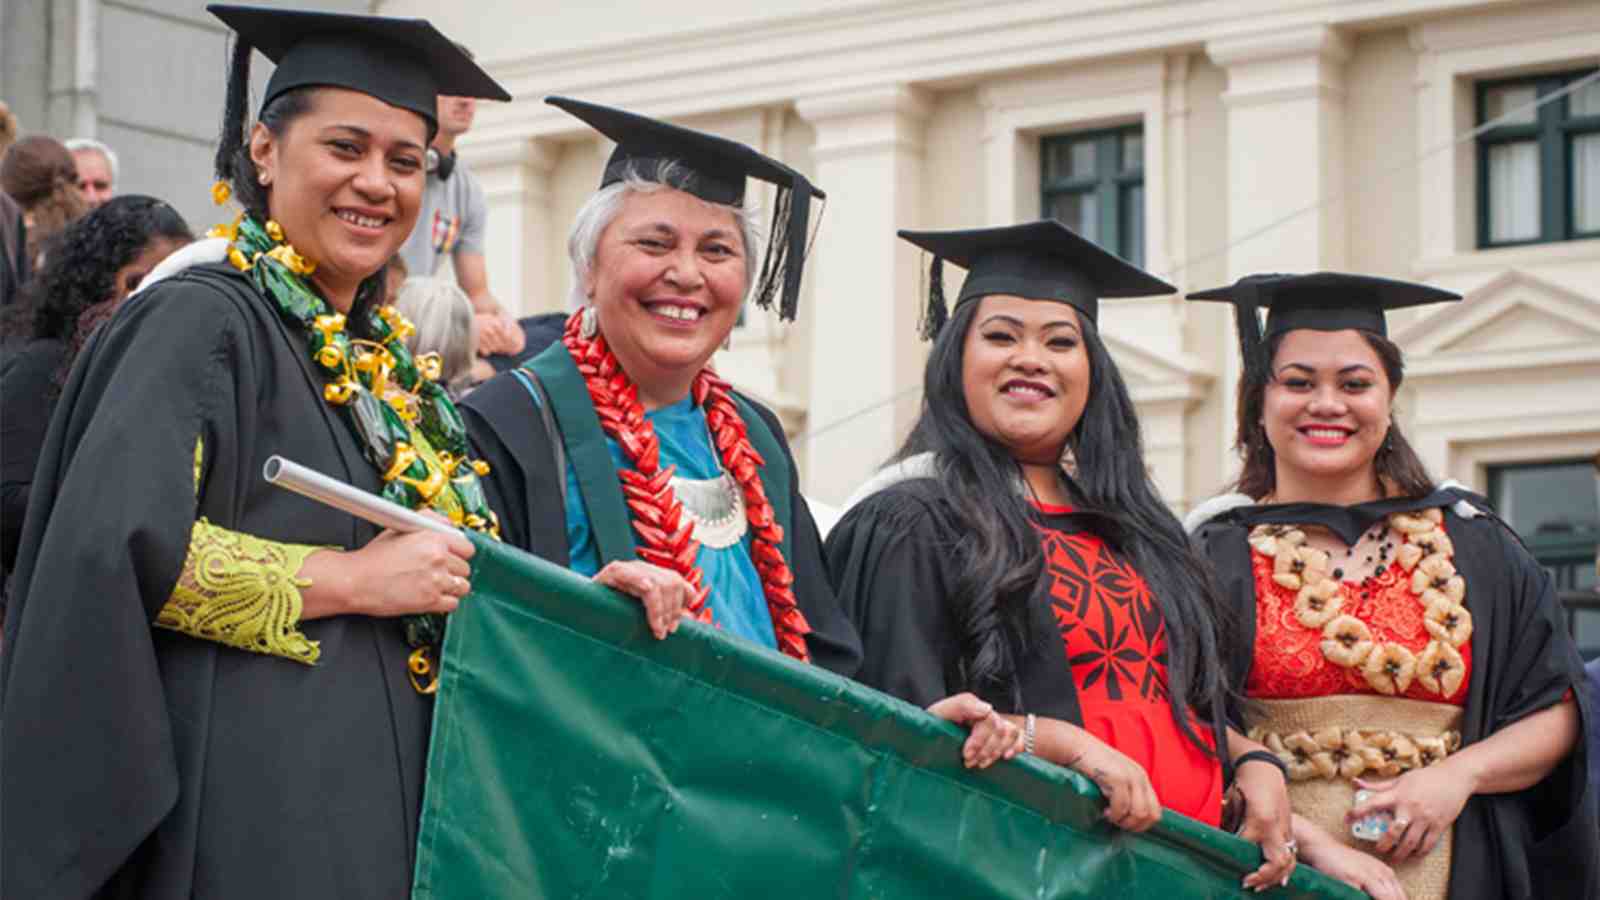 Three students and a professor all smile while wearing graduation gowns and caps, all holding a banner for a parade.